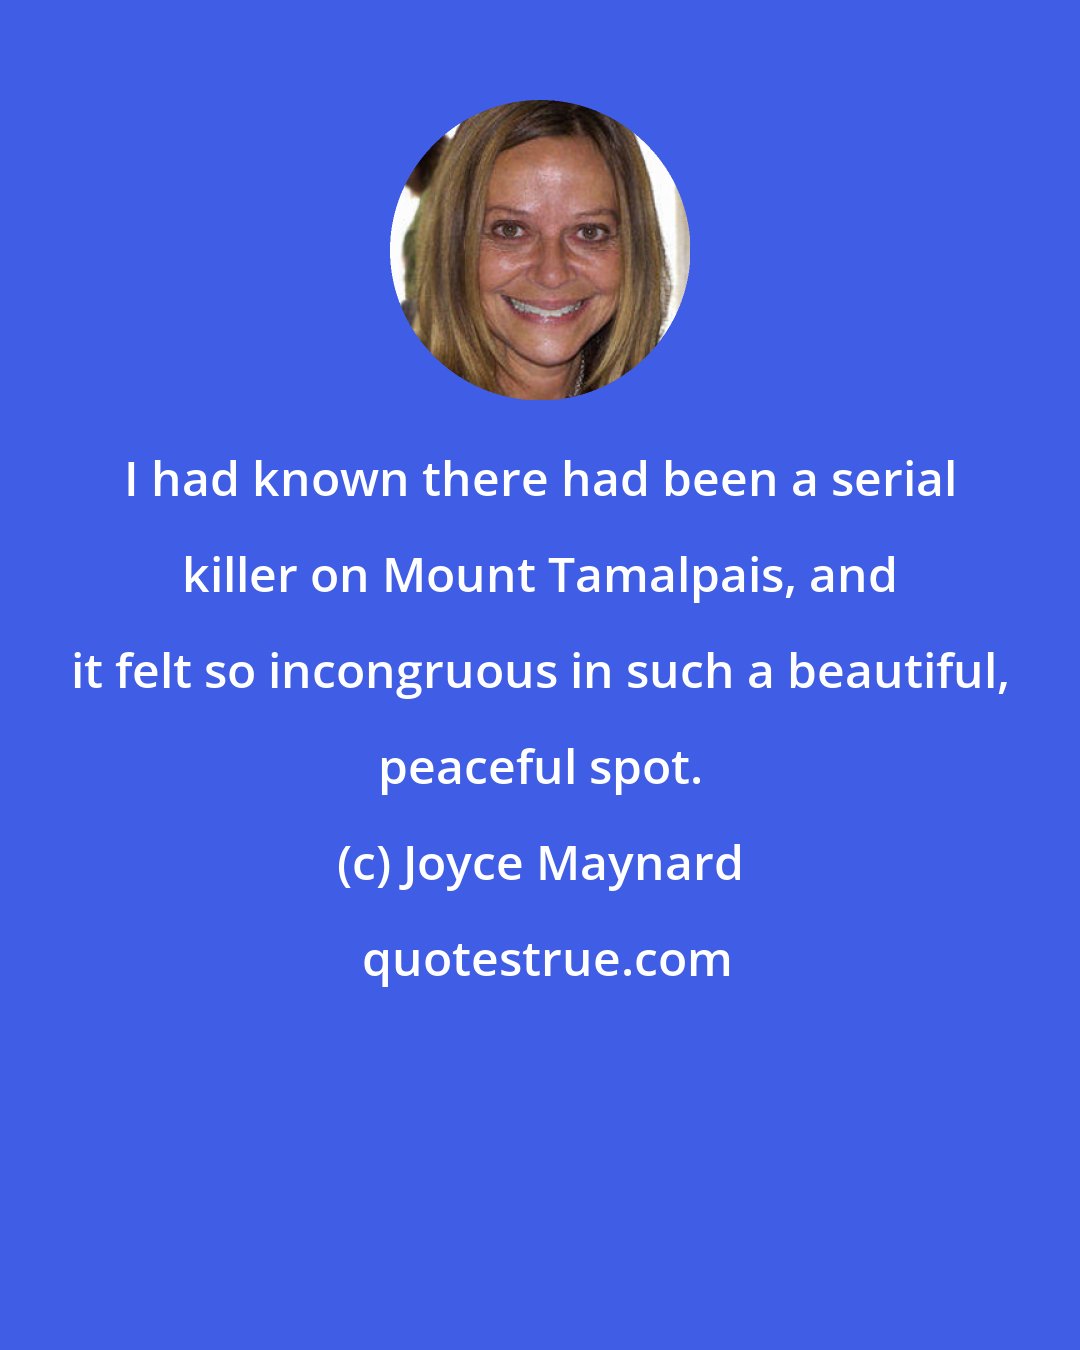 Joyce Maynard: I had known there had been a serial killer on Mount Tamalpais, and it felt so incongruous in such a beautiful, peaceful spot.